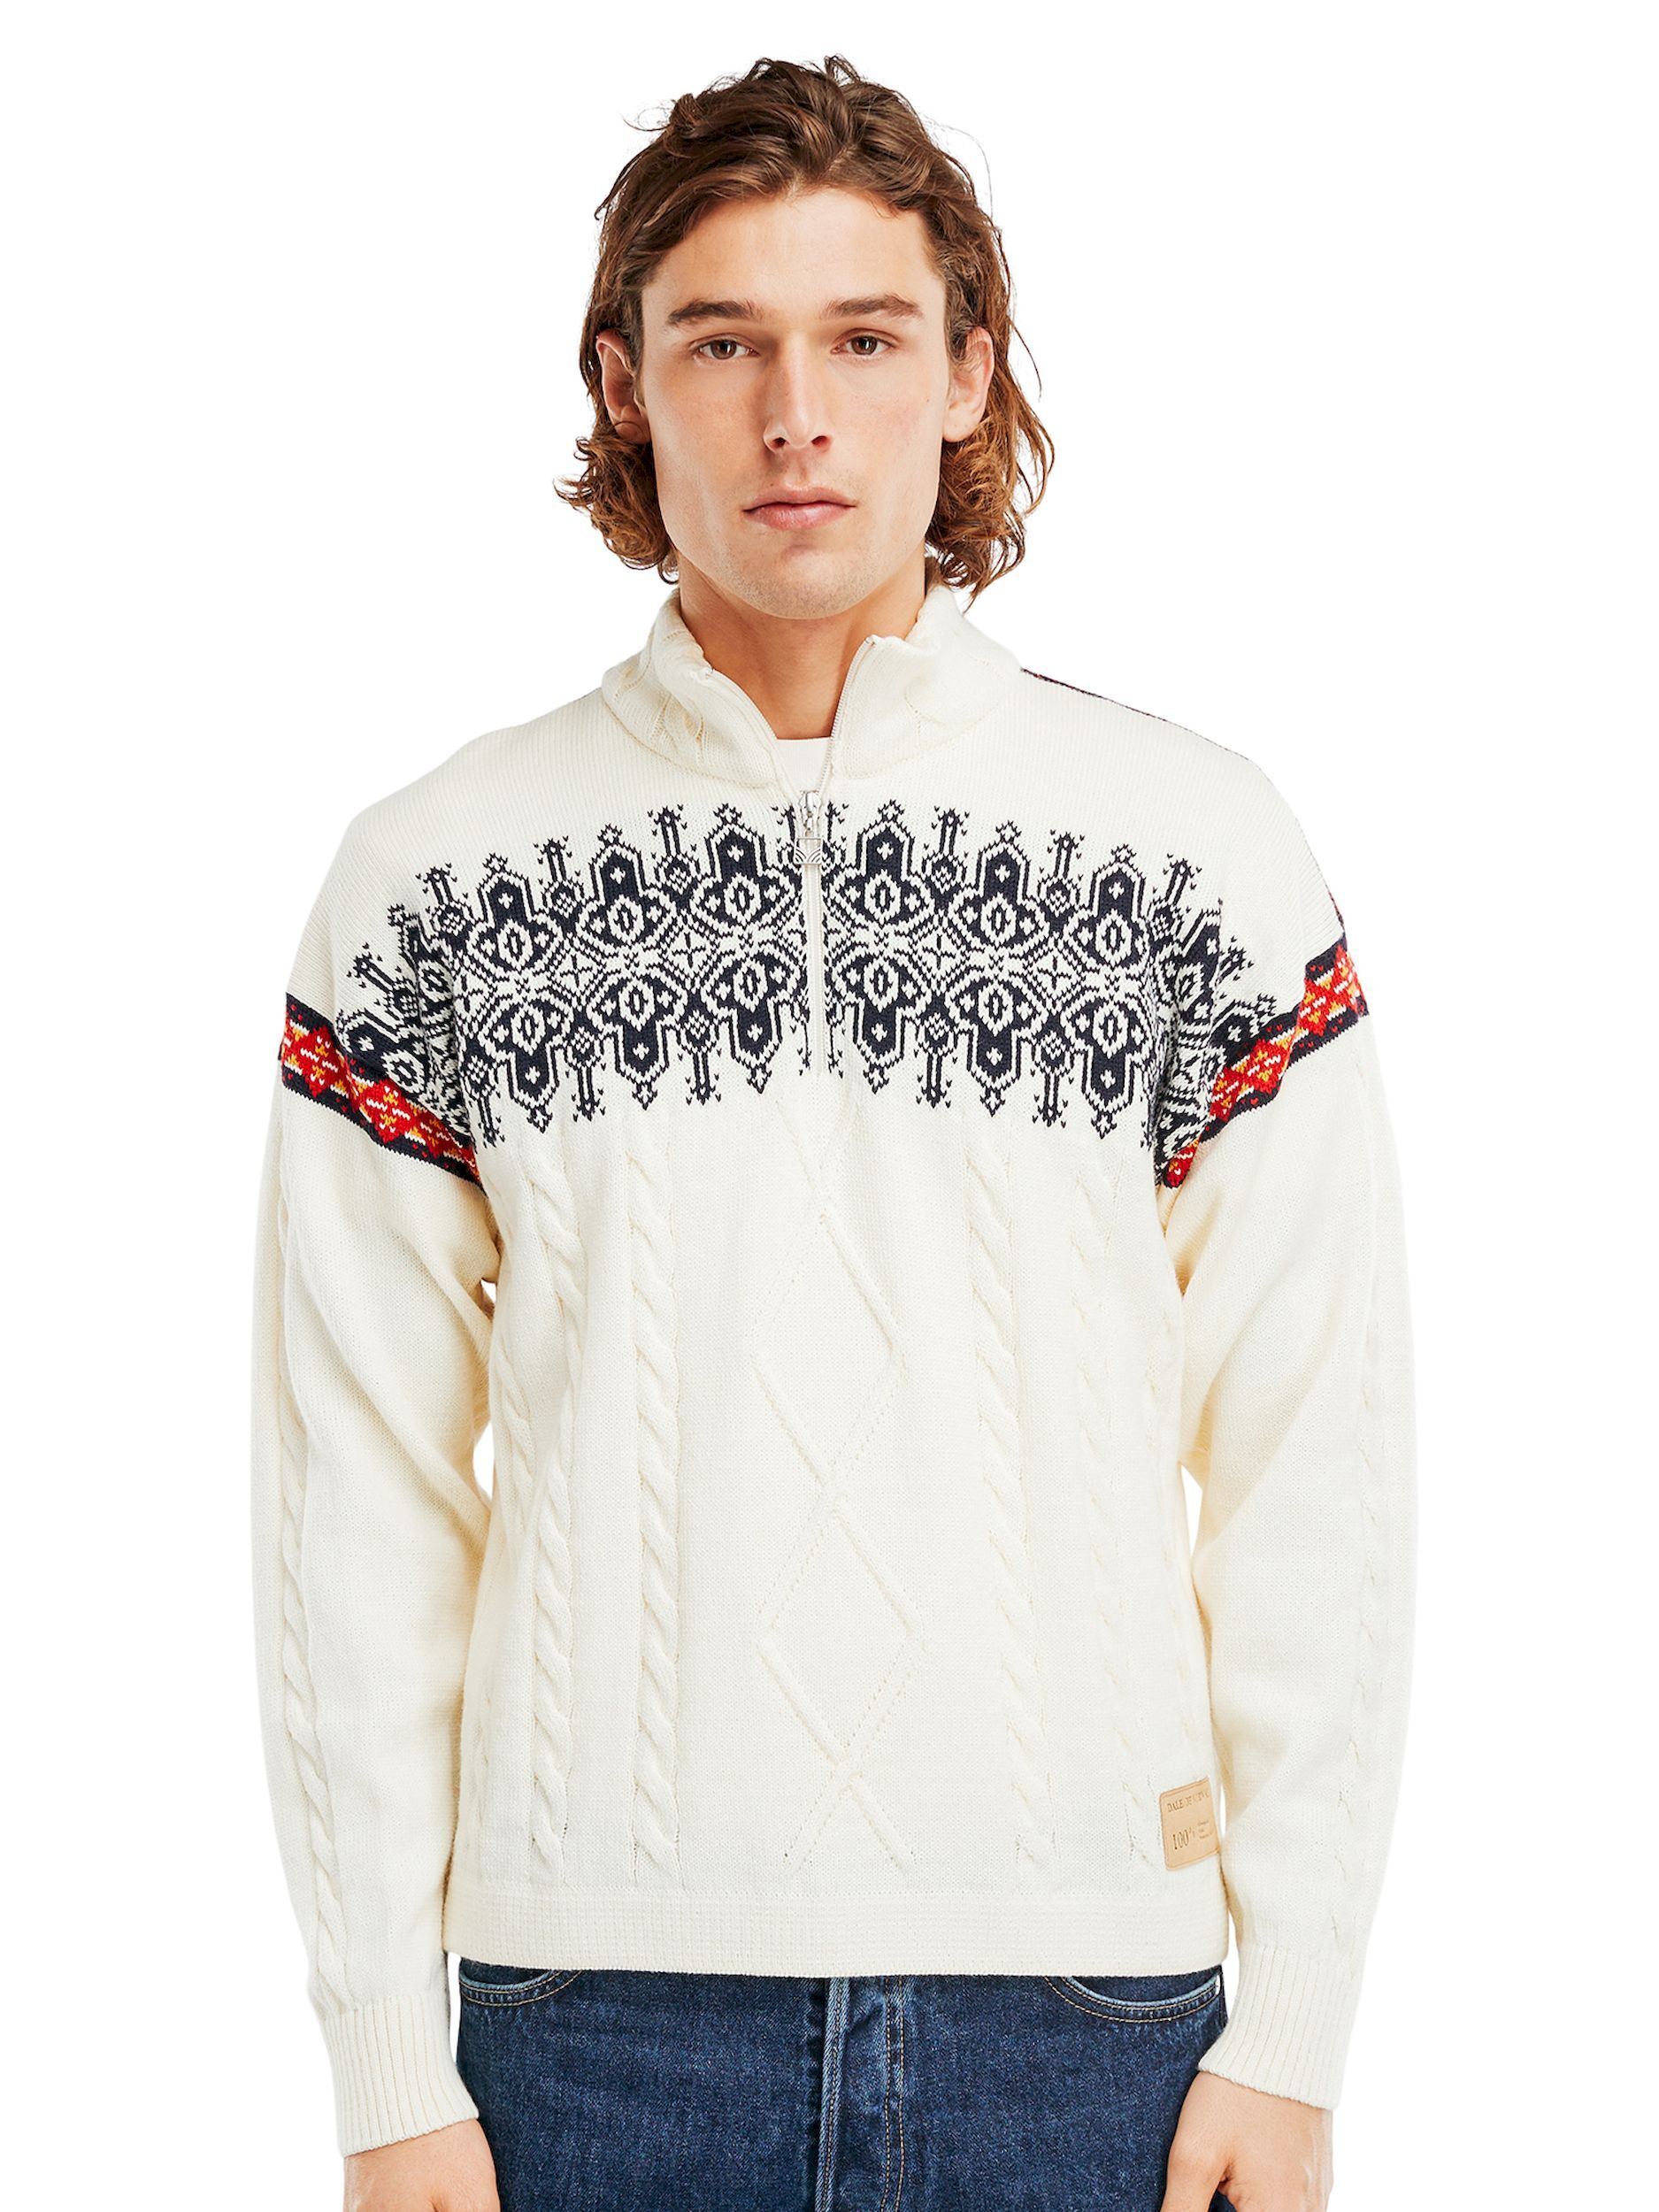 Dale of Norway Aspøy Masc Sweater - Pullover - Miehet